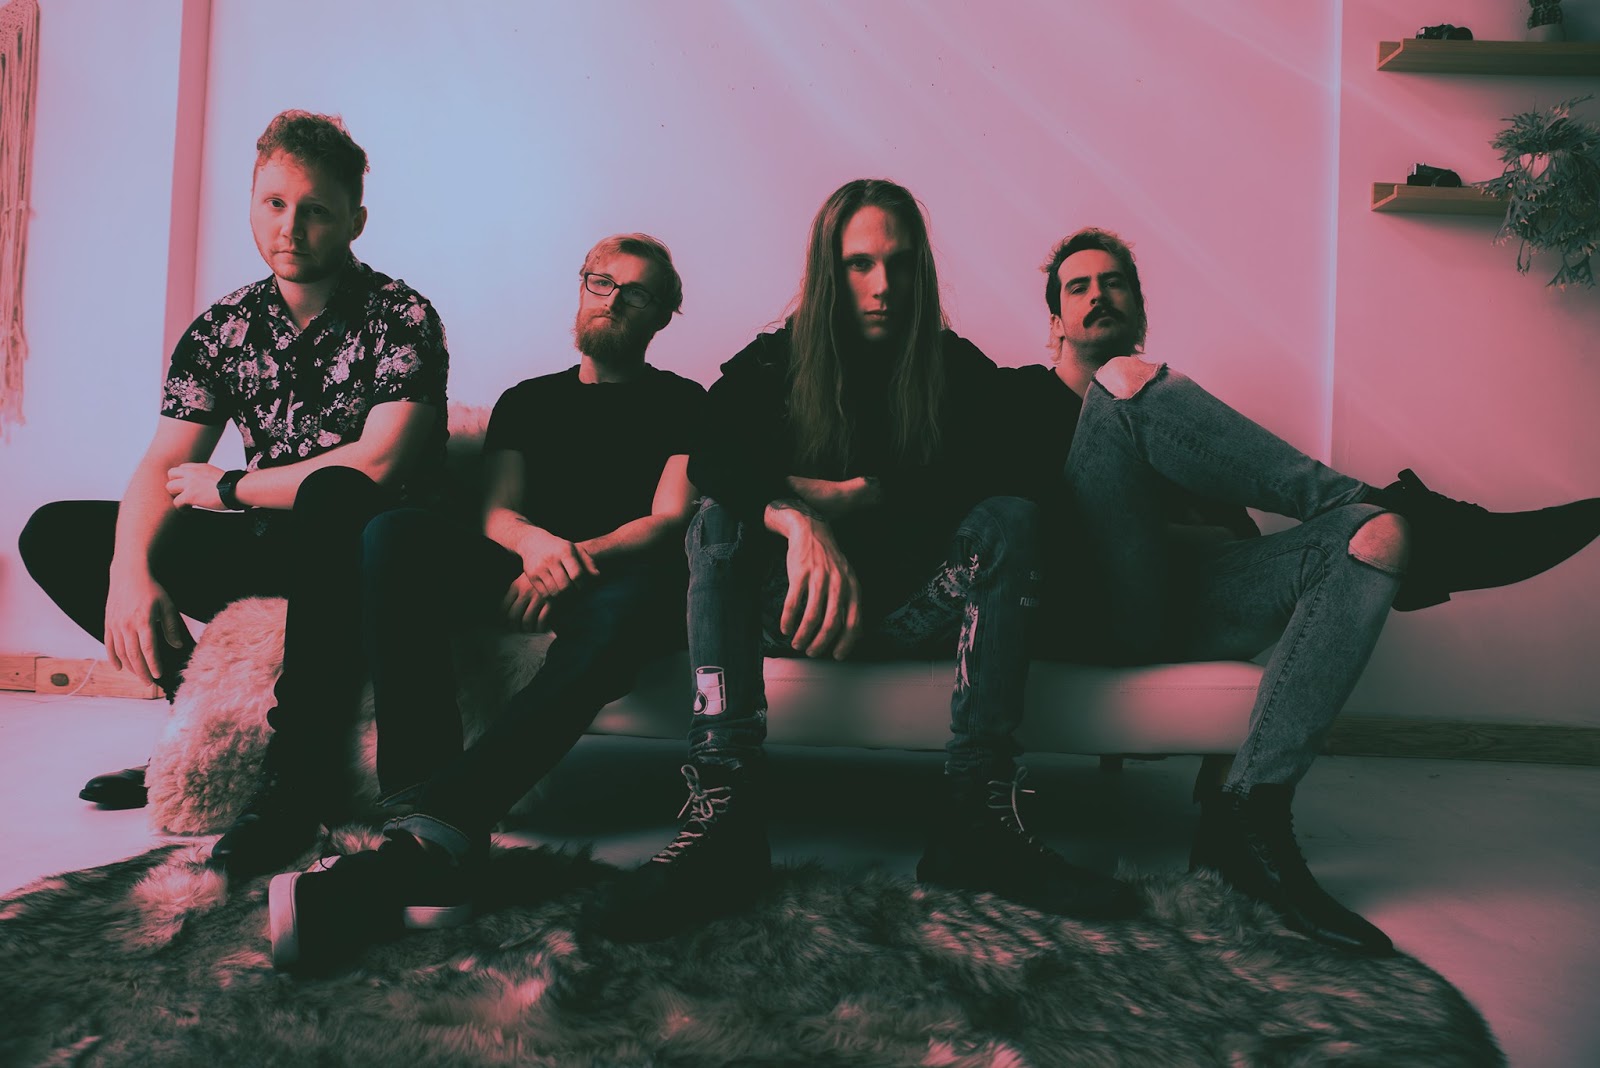 OUTLINE IN COLOR RELEASE “PUNISHMENT” MUSIC VIDEO FEATURING KALIE WOLFE